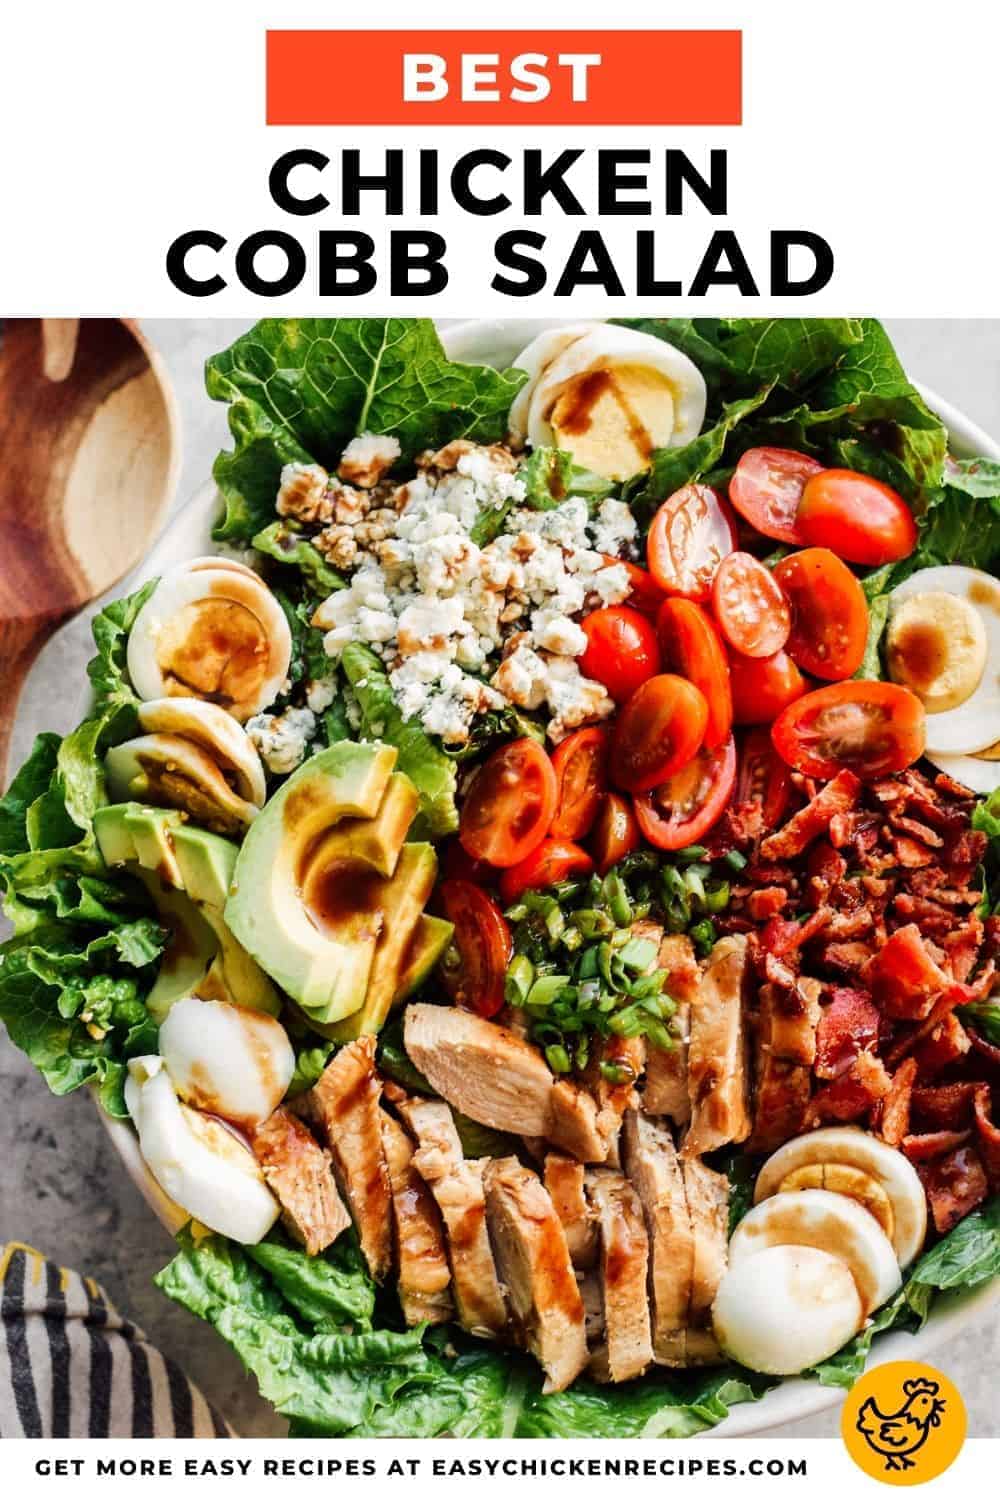 Chicken Cobb Salad - Easy Chicken Recipes (HOW TO VIDEO)